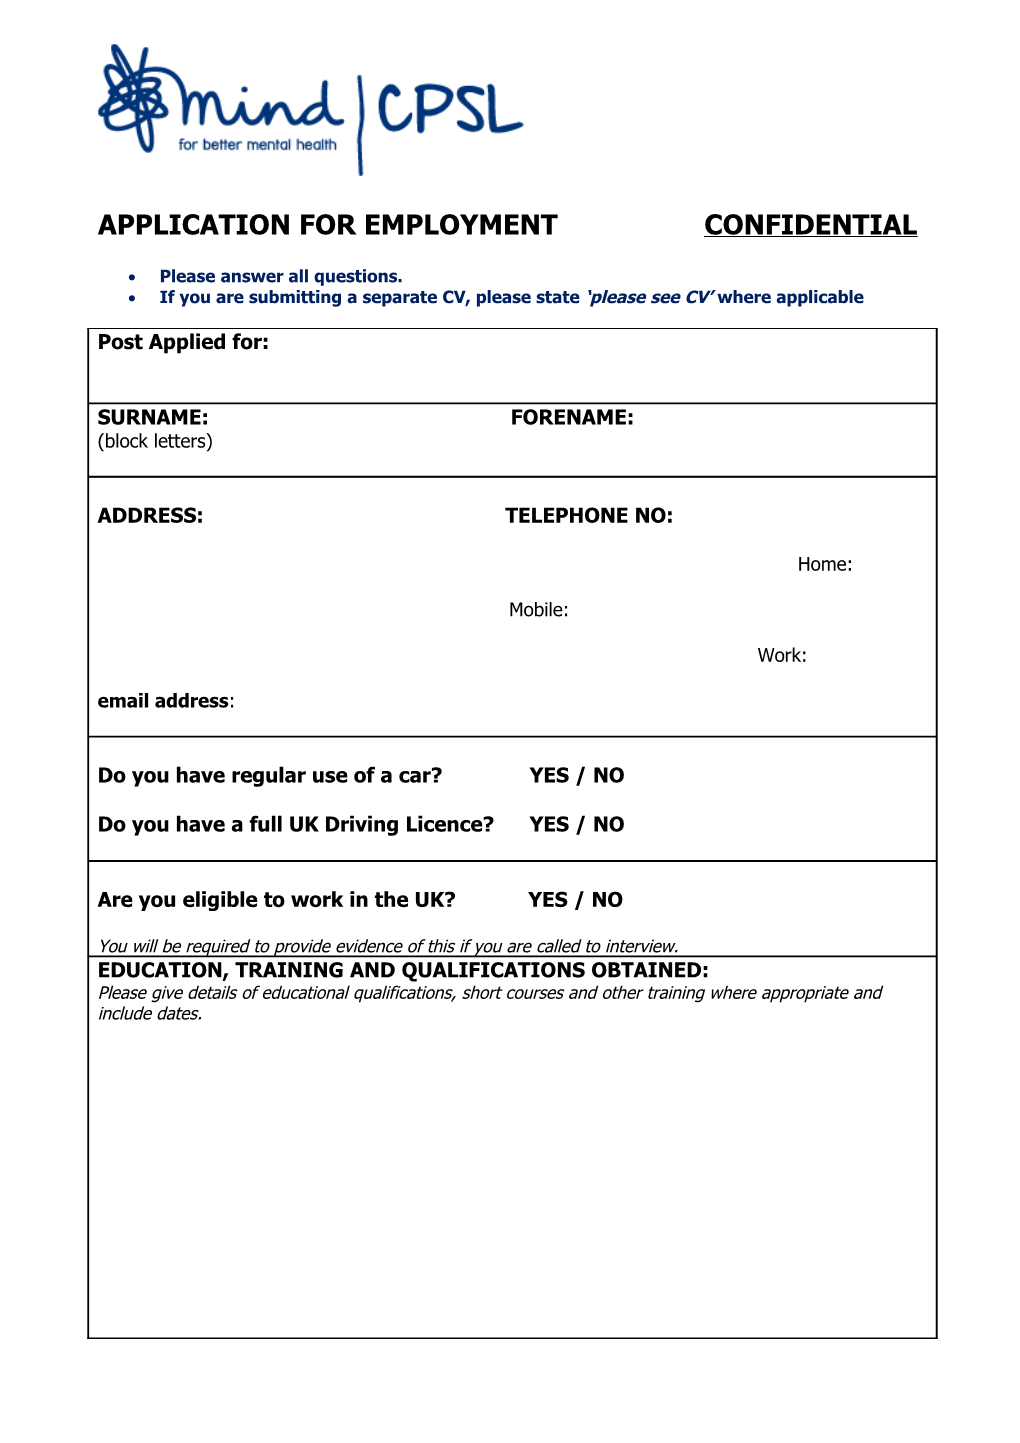 Application for Employment Confidential s1